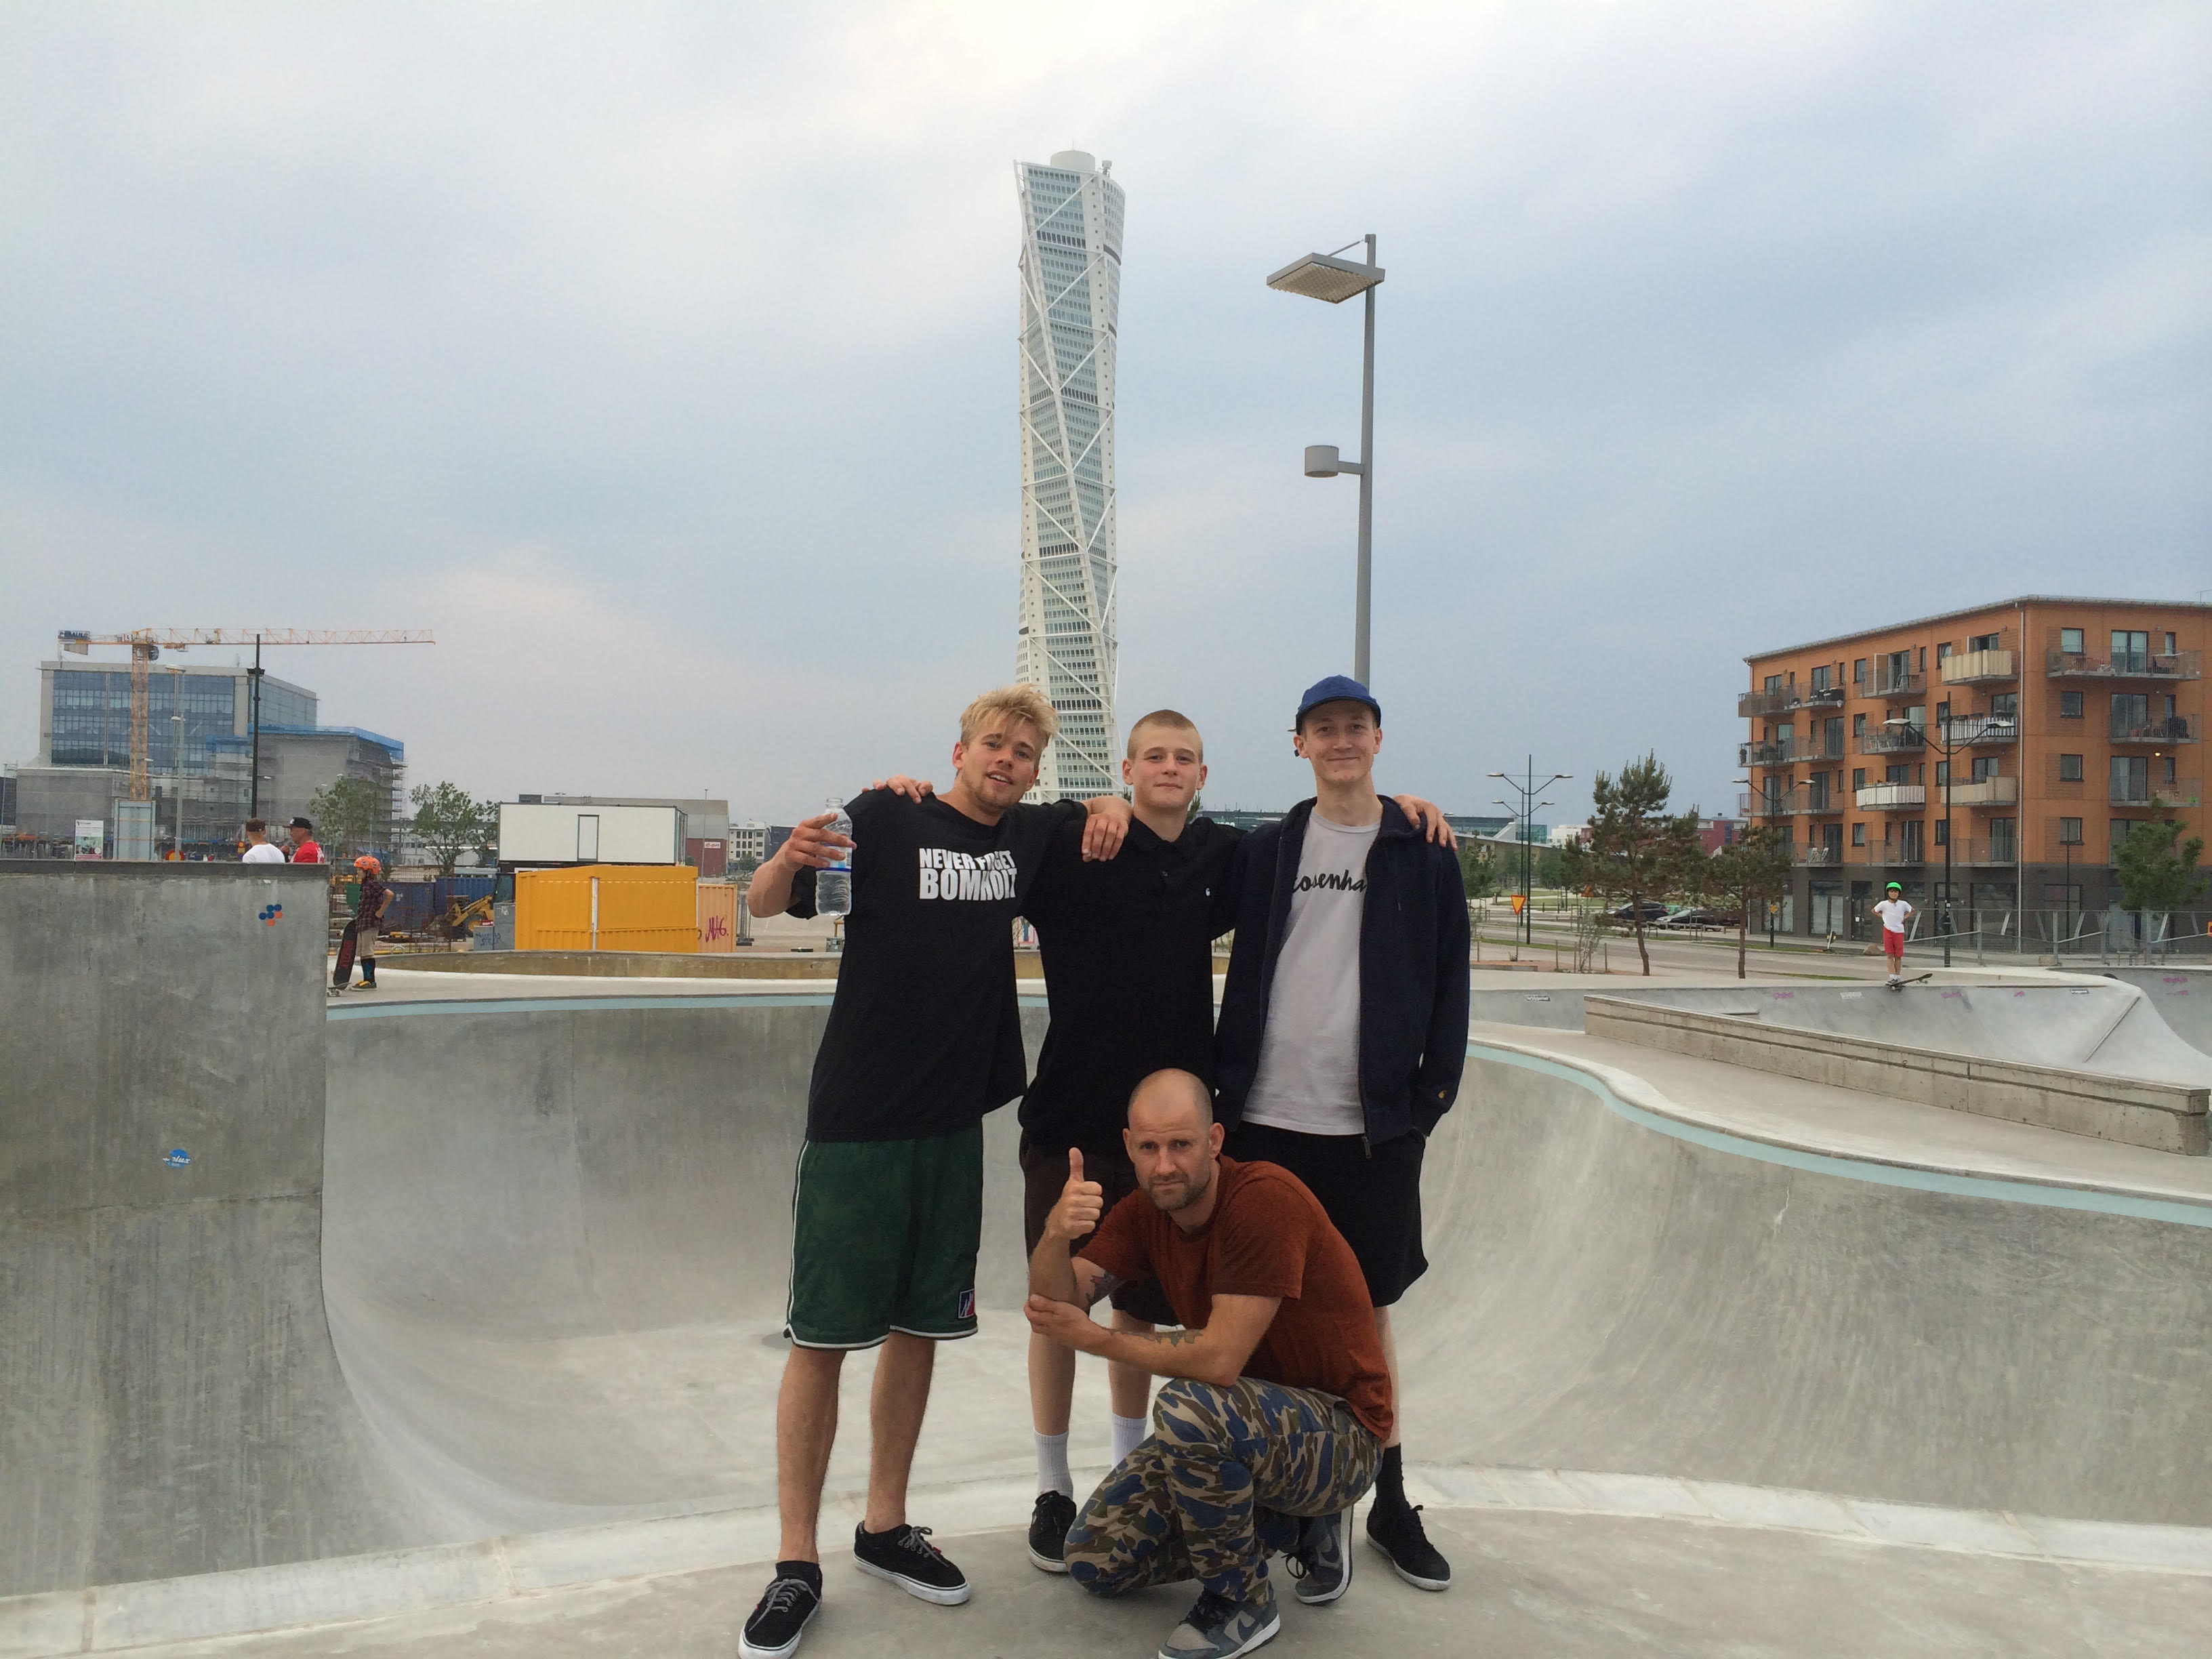 Jonas Skrøder,Hugo Boserup, Morten Westh, Thomas Kring, this was the day The shredders lodge formed and created.